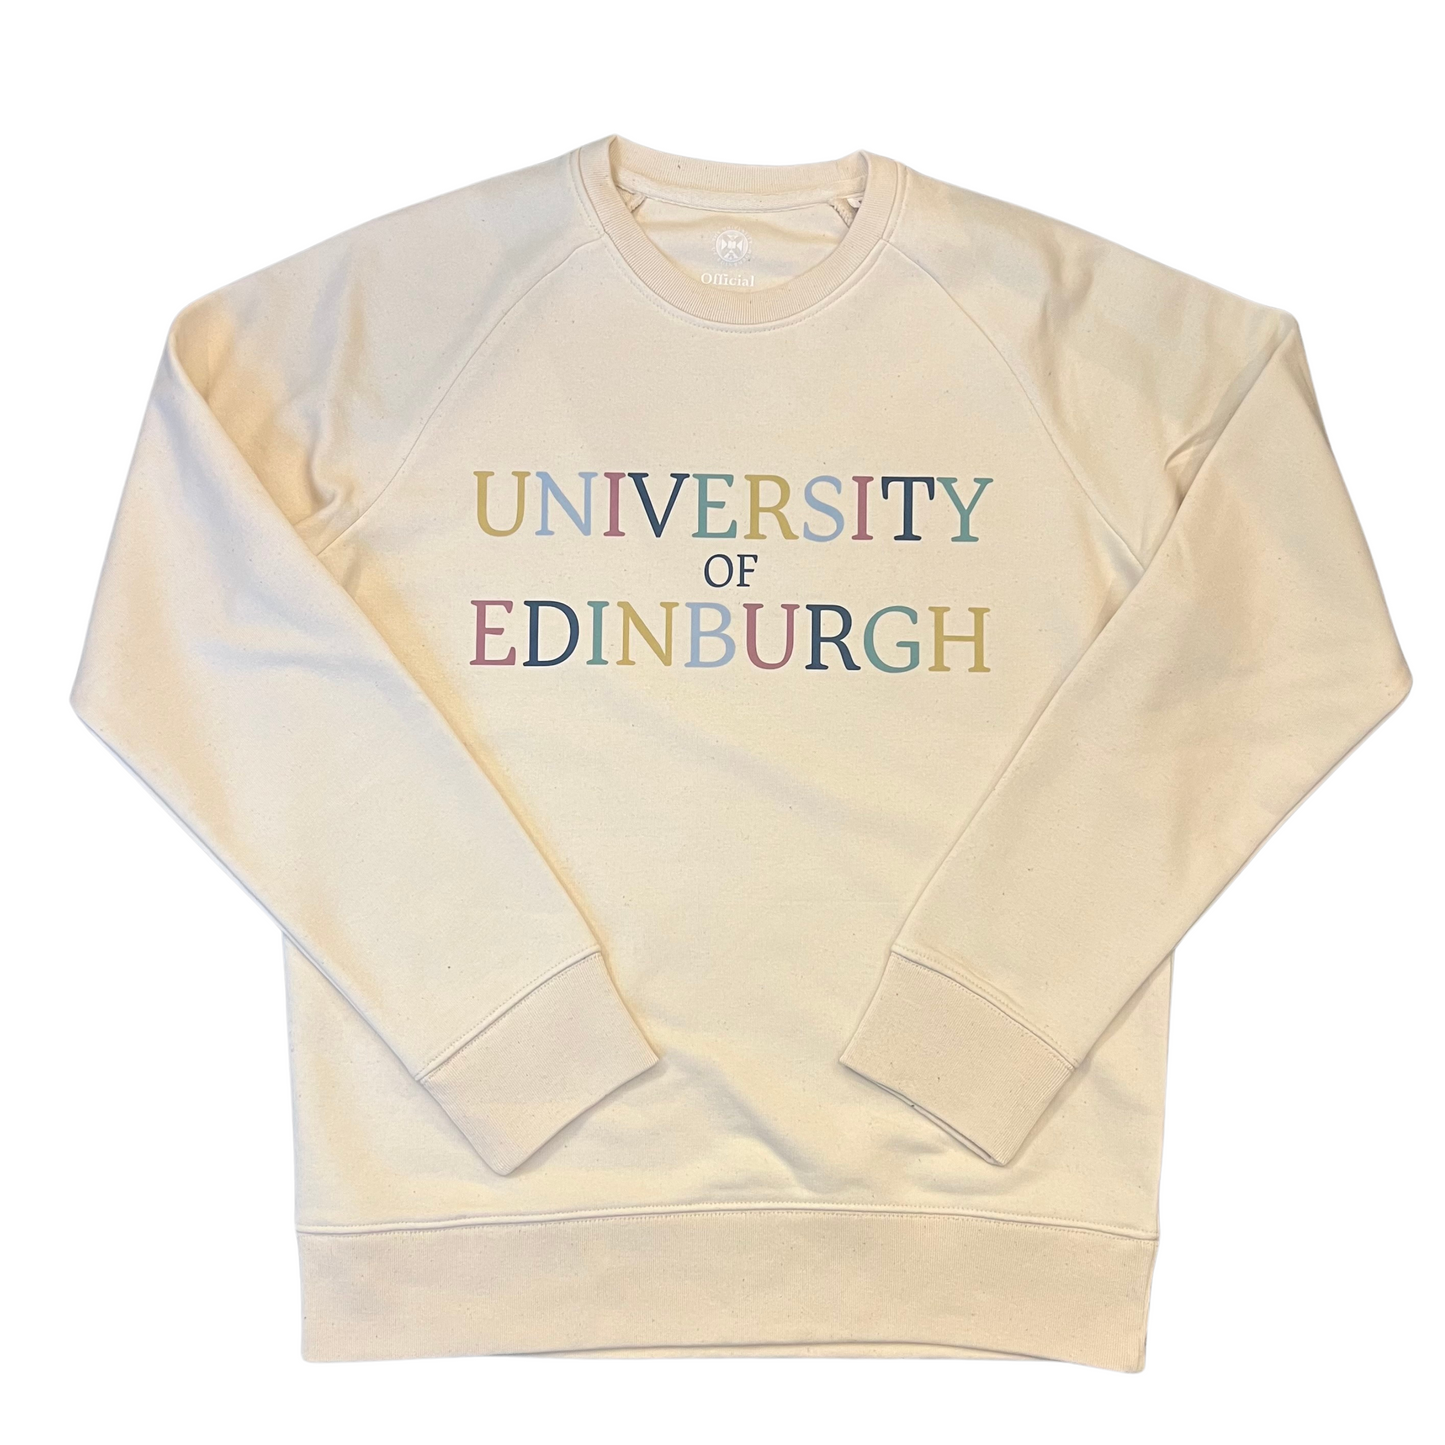 a cream coloured crew sweatshirt with colourful lettering spelling out university of edinburgh